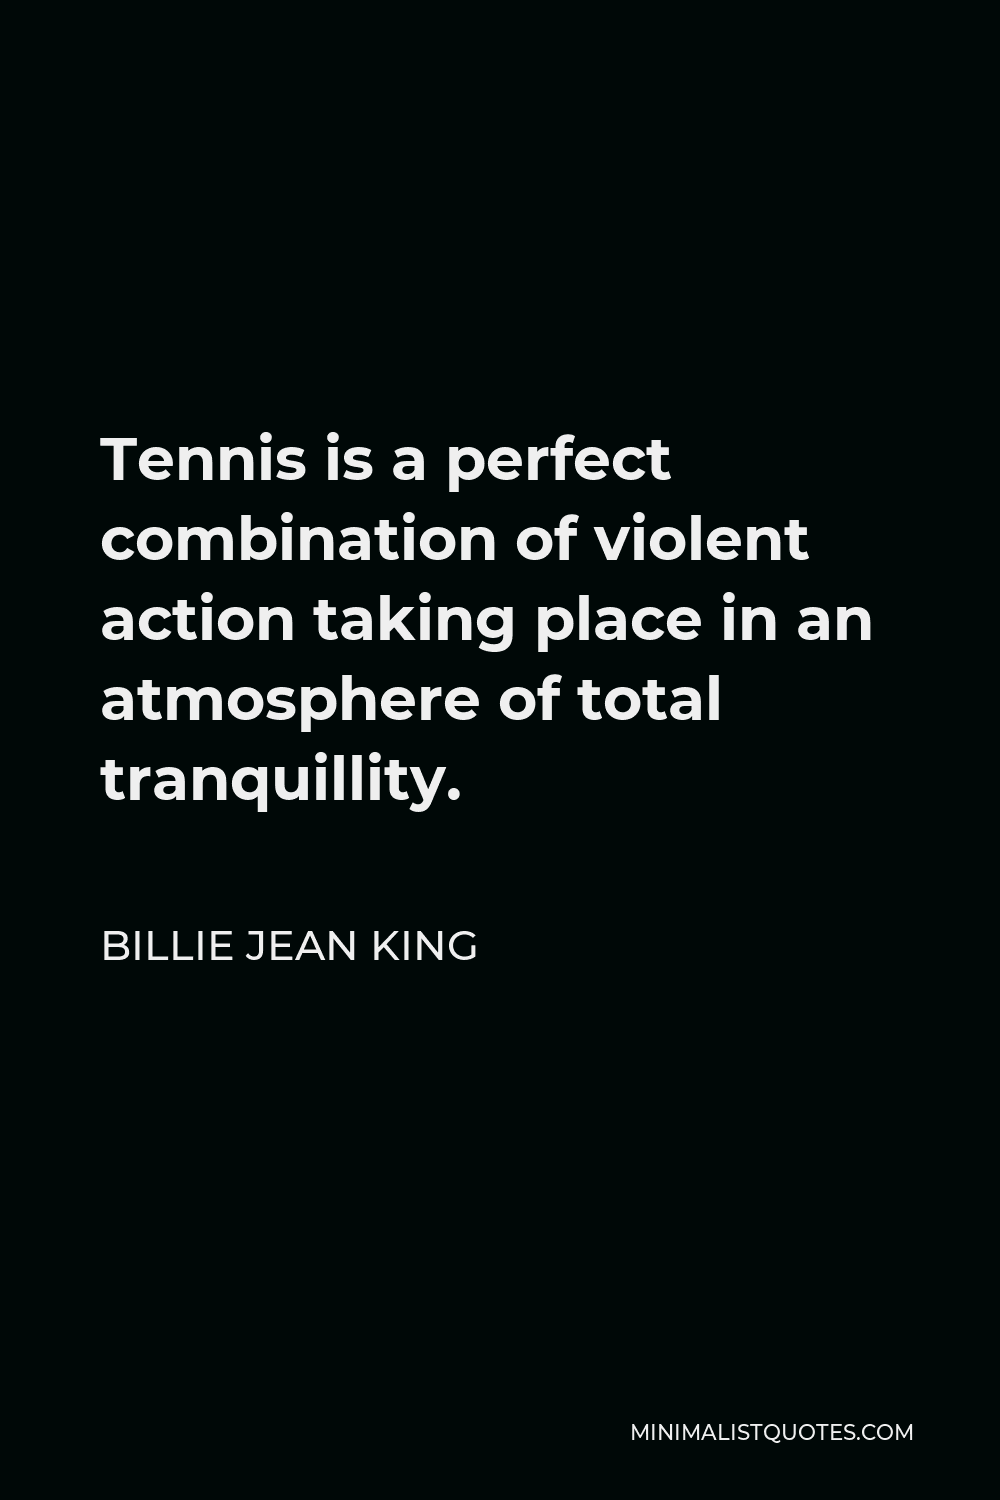 Billie Jean King Quote - Tennis is a perfect combination of violent action taking place in an atmosphere of total tranquillity.